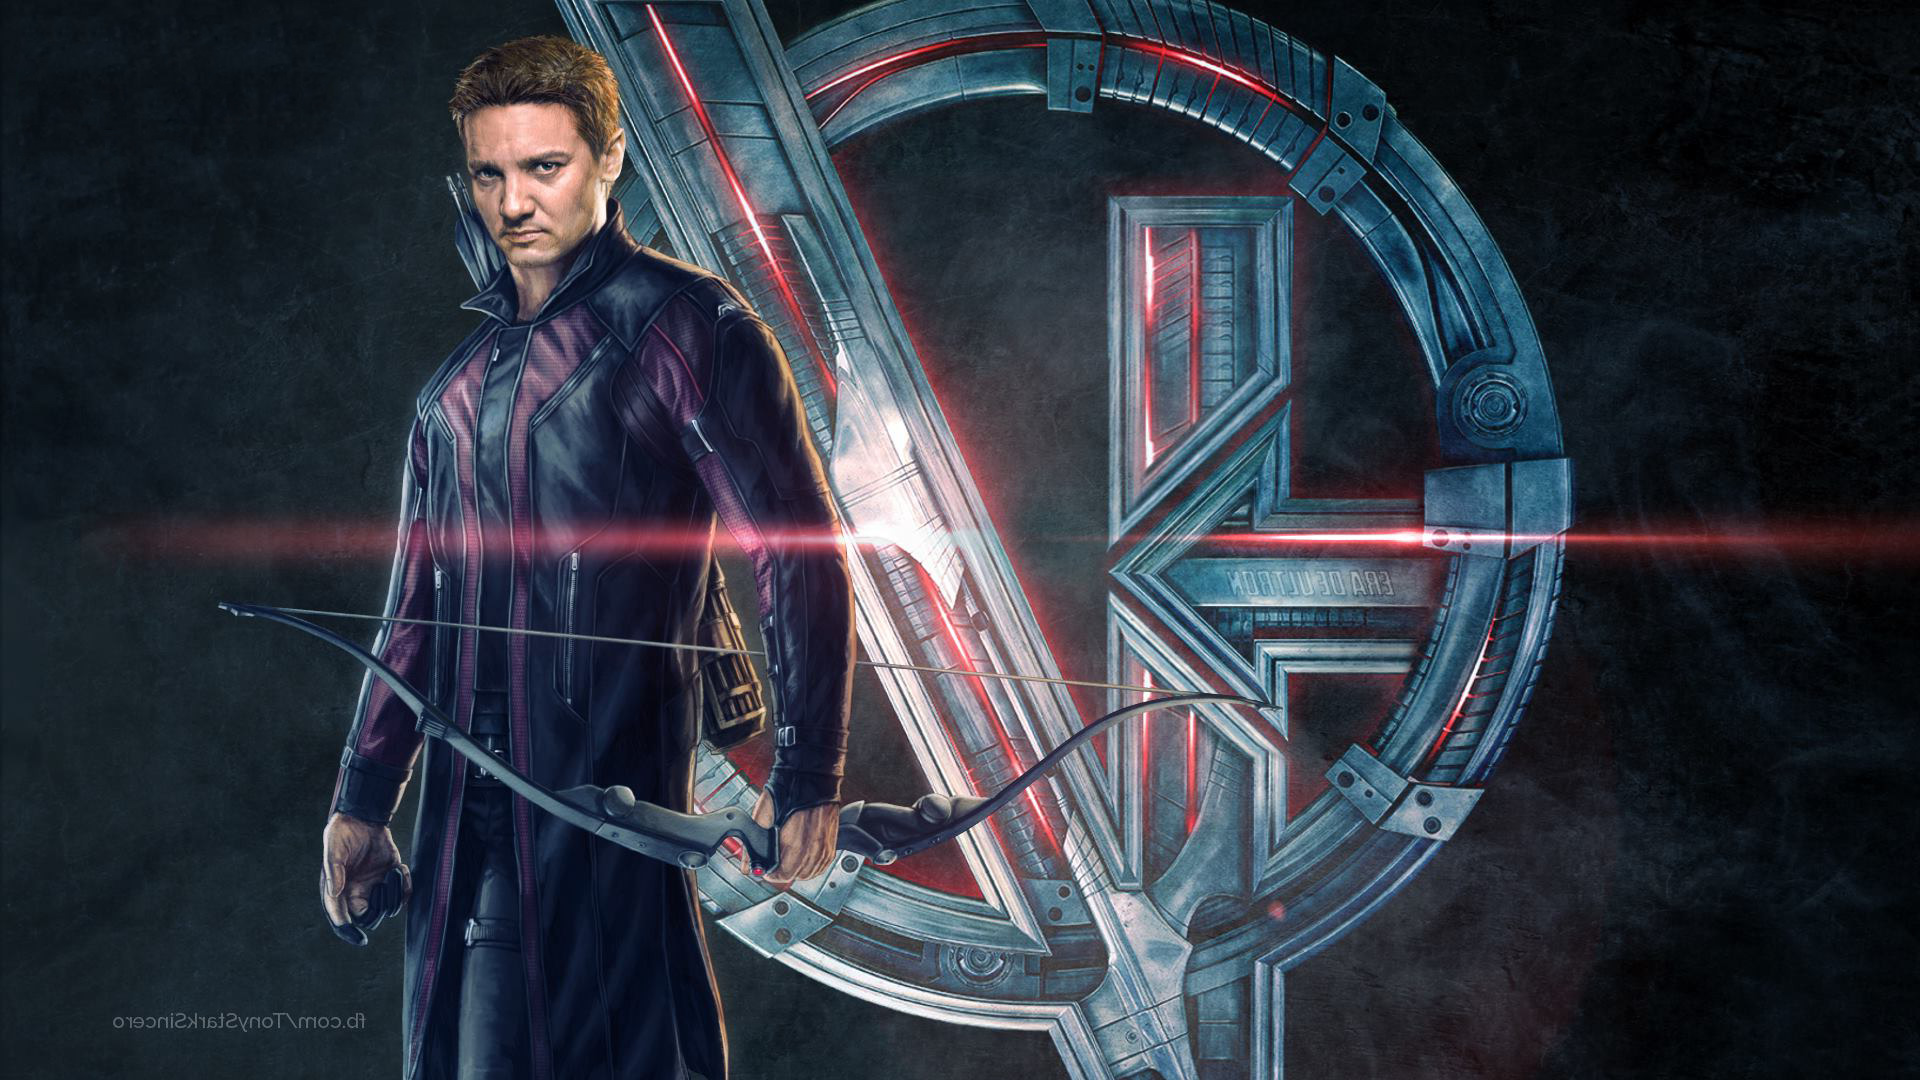 The Avengers, Avengers: Age Of Ultron, Superhero, Symbols, Jeremy Renner, Bow And Arrow, Clint Barton, Movies, Concept Art, Hawkeye Wallpaper